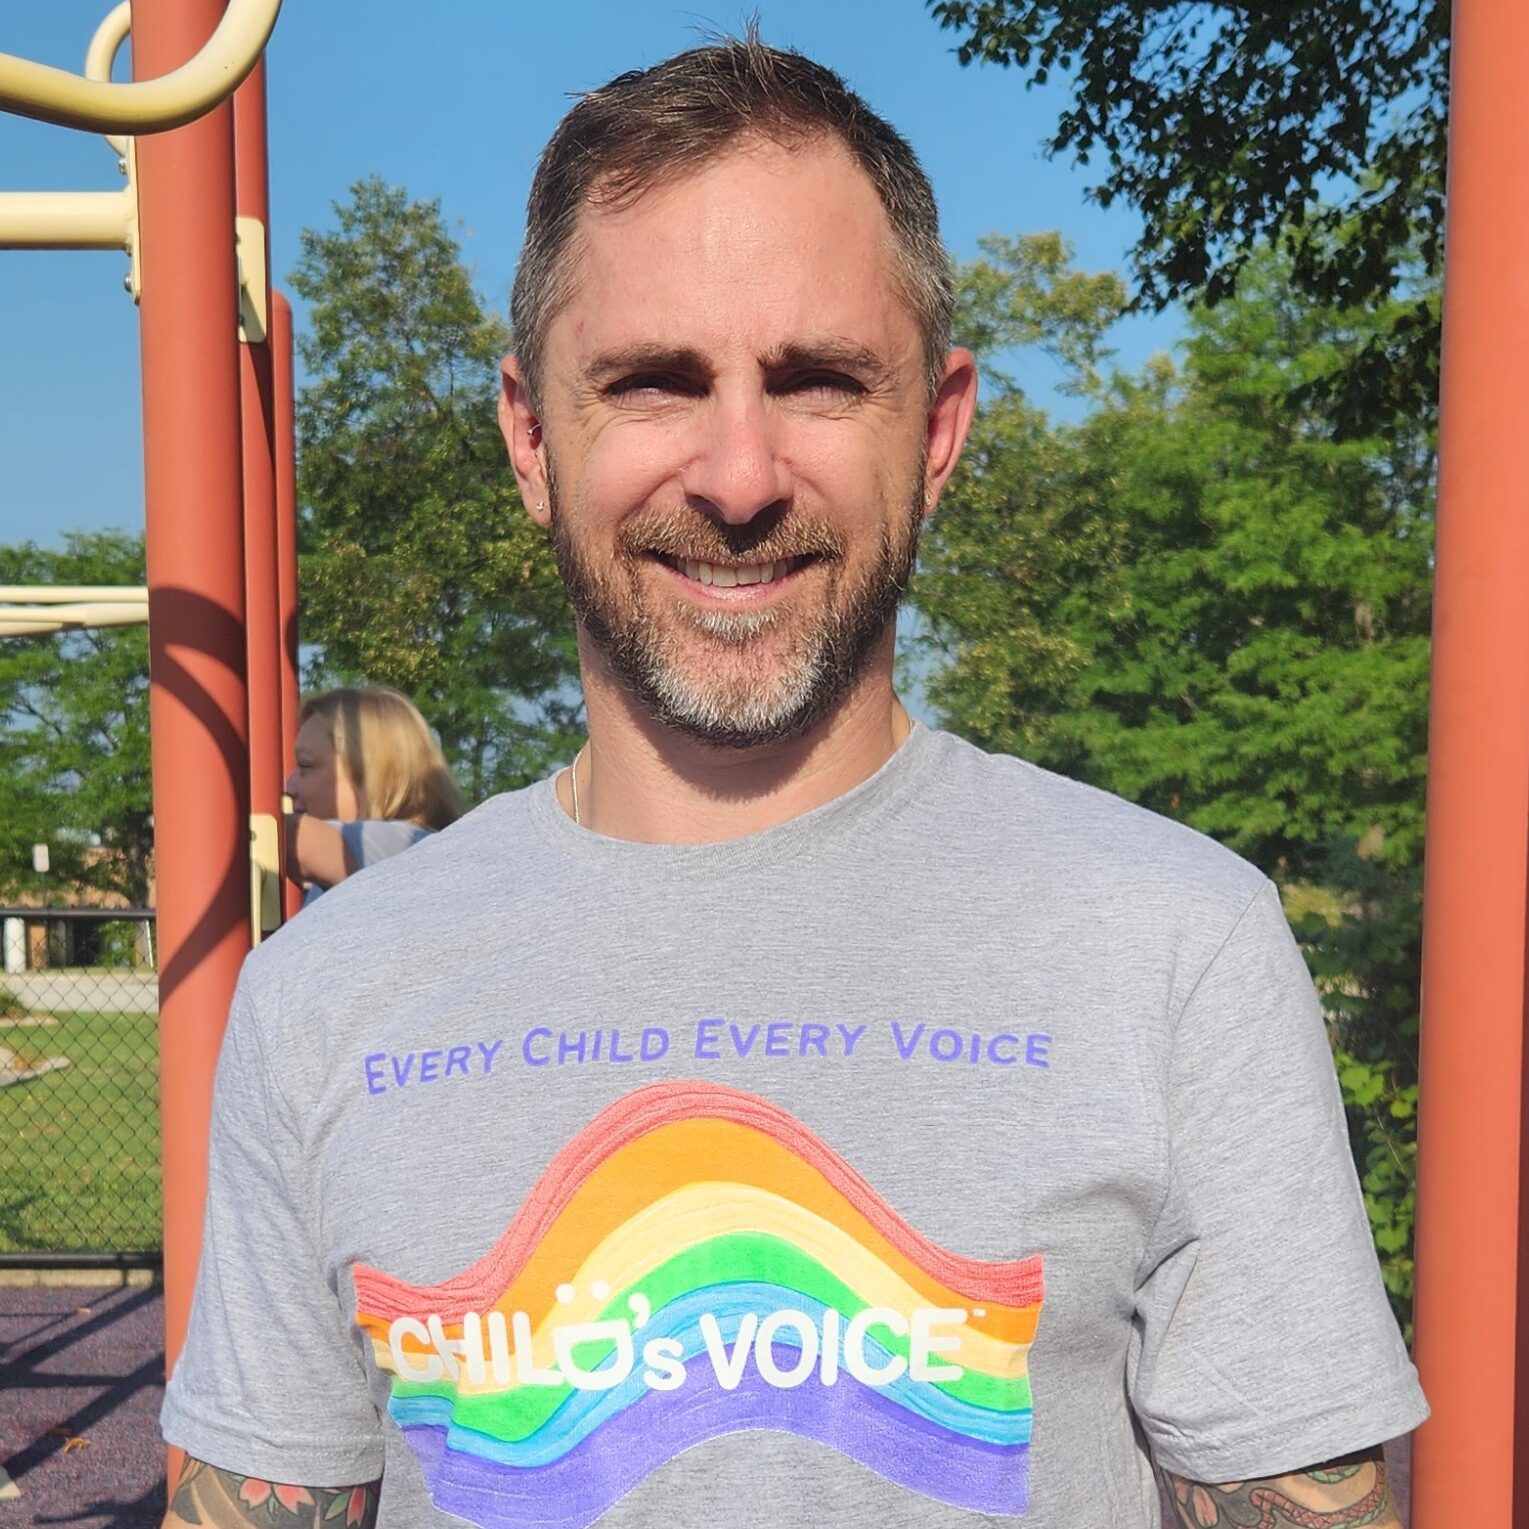 A man in a grey t-shirt with a rainbow on front stands in front of a playground